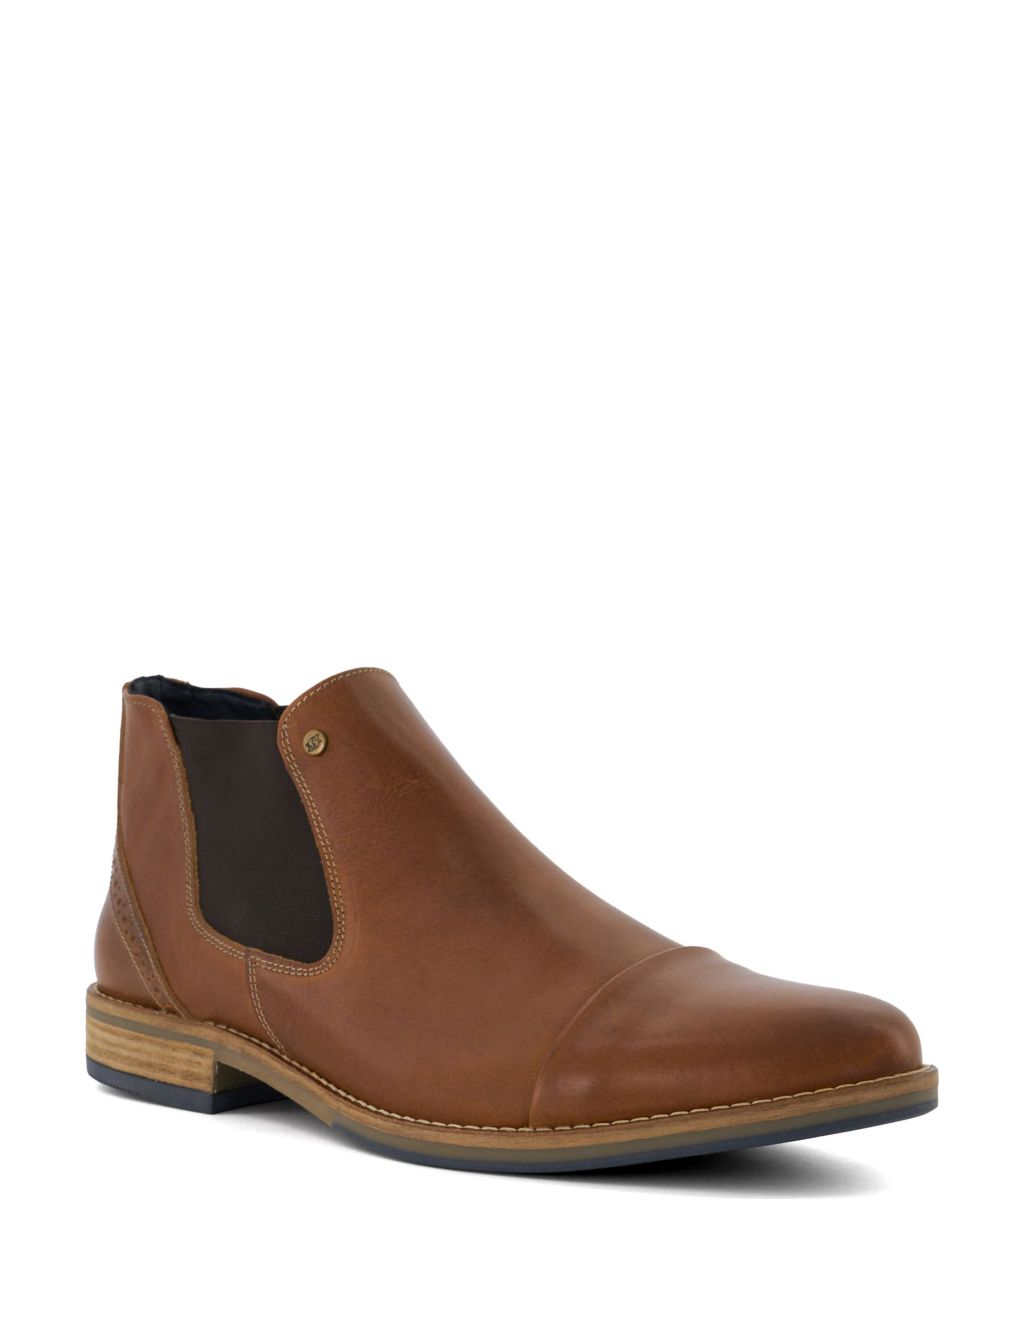 Leather Pull-On Chelsea Boots image 2